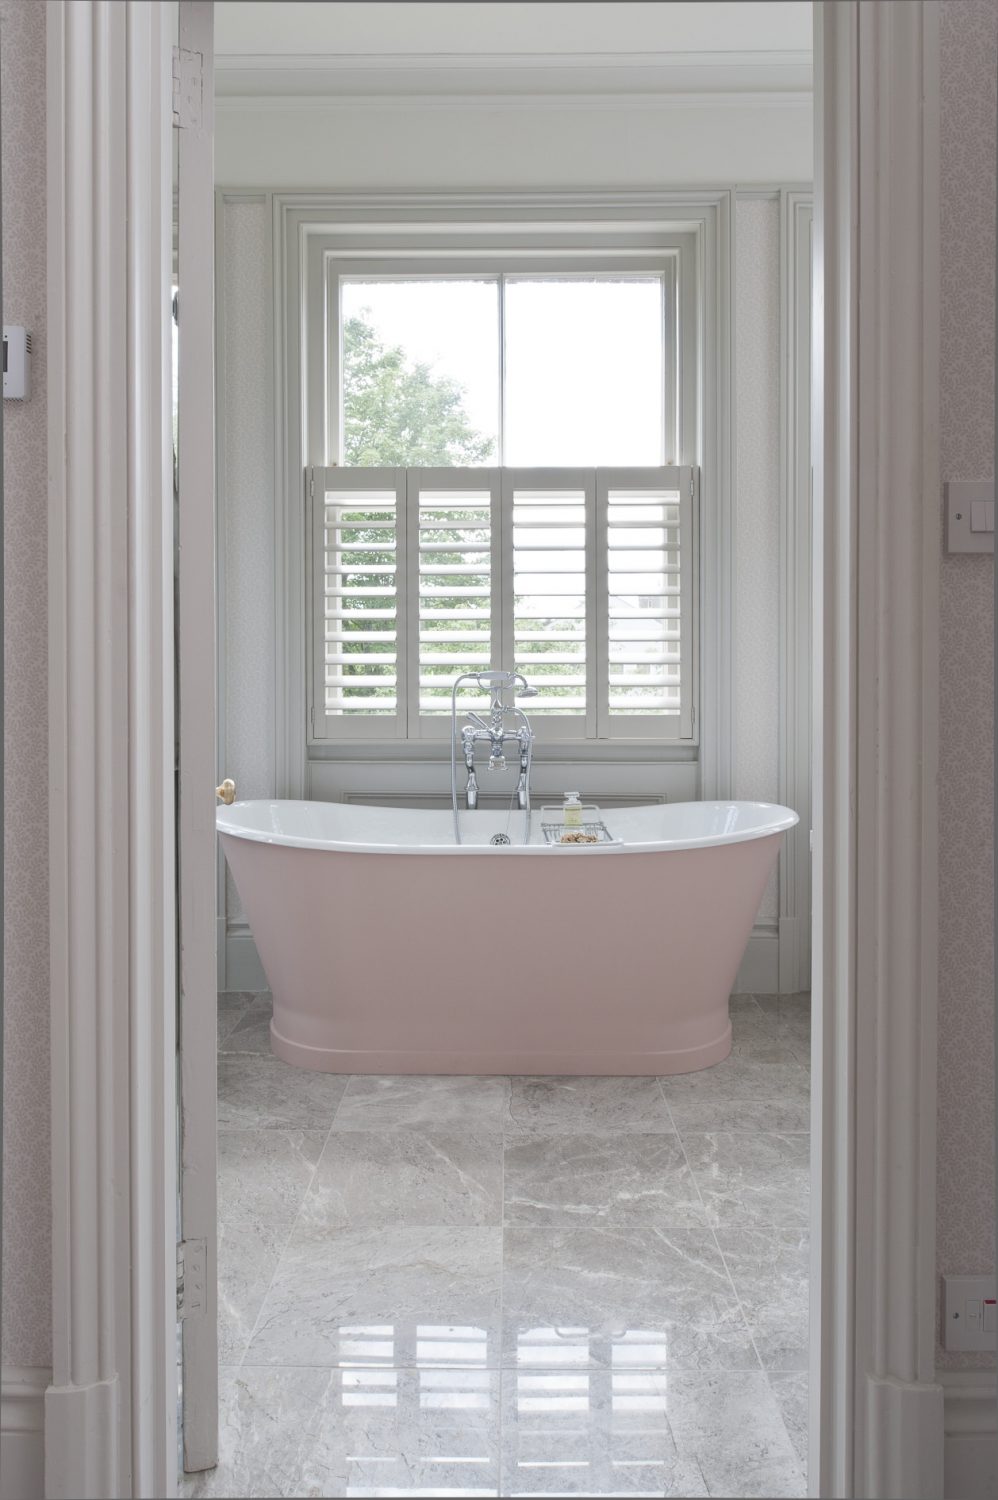 The shell pink bath sits in the centre of the marble-floored master bathroom; shutters provide privacy without losing light